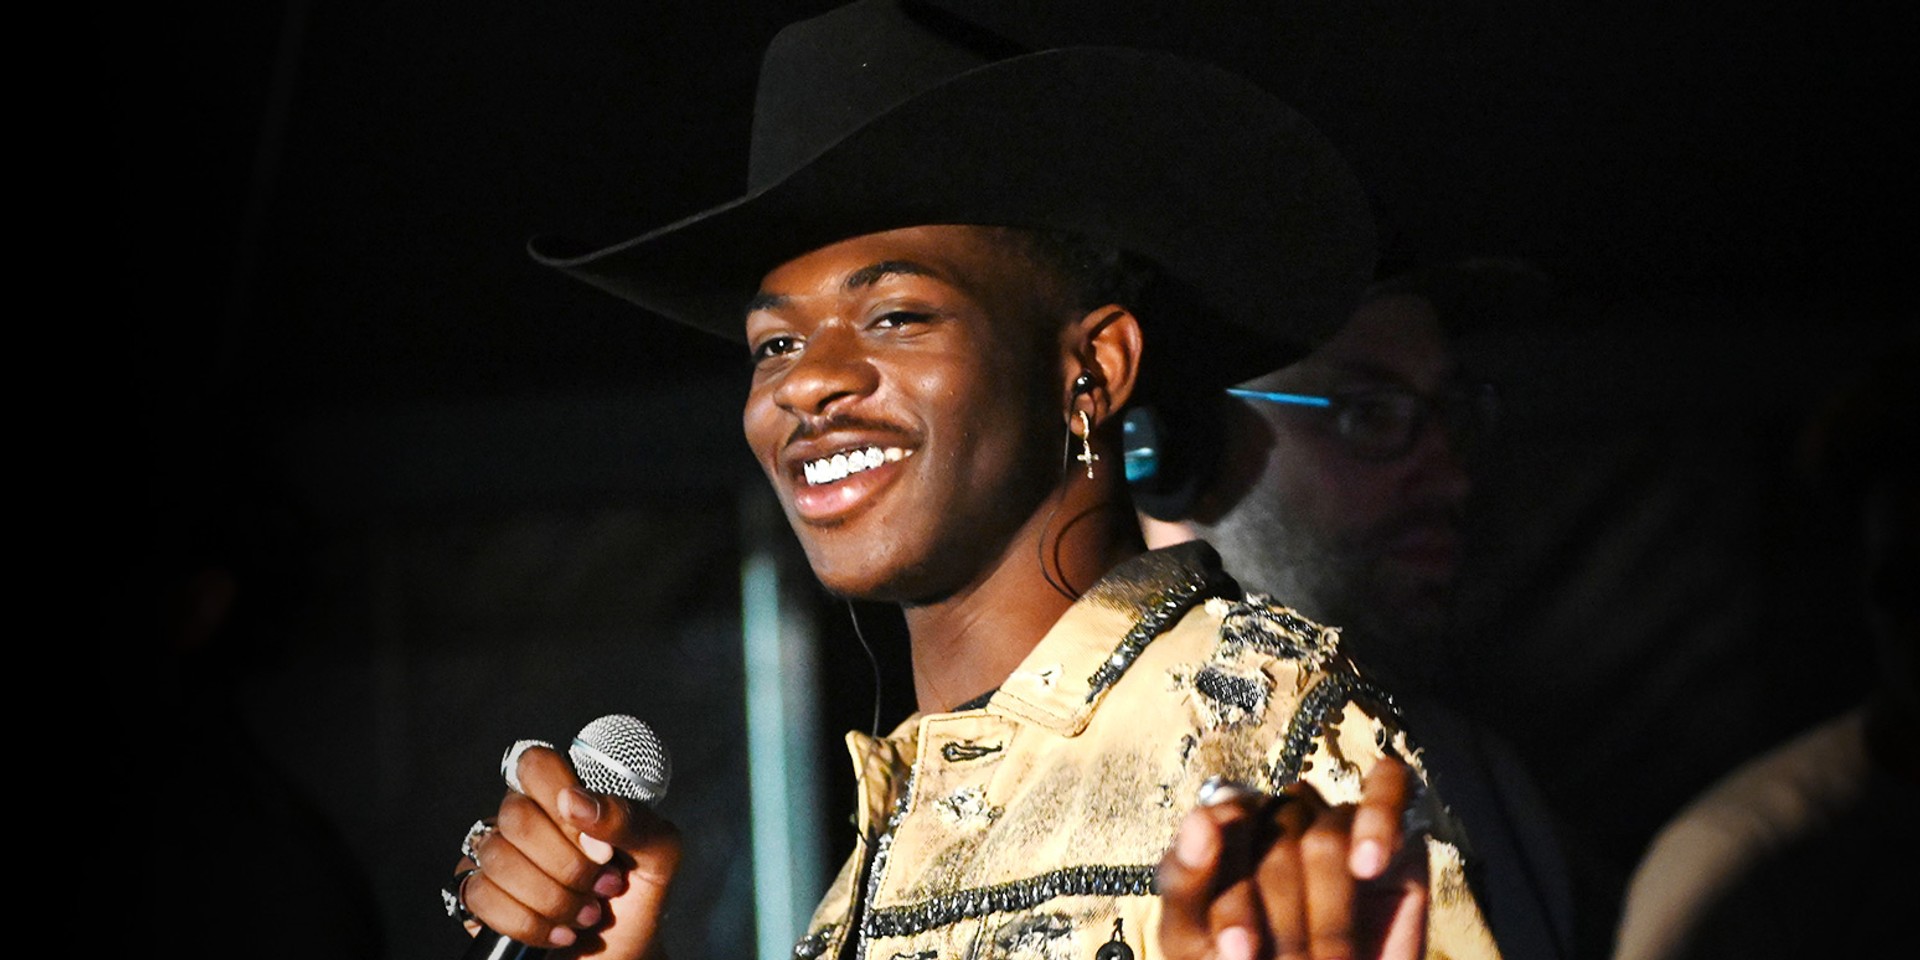 Lil Nas X releases new EP 7, features Billy Ray Cyrus, Cardi B, and Travis Barker